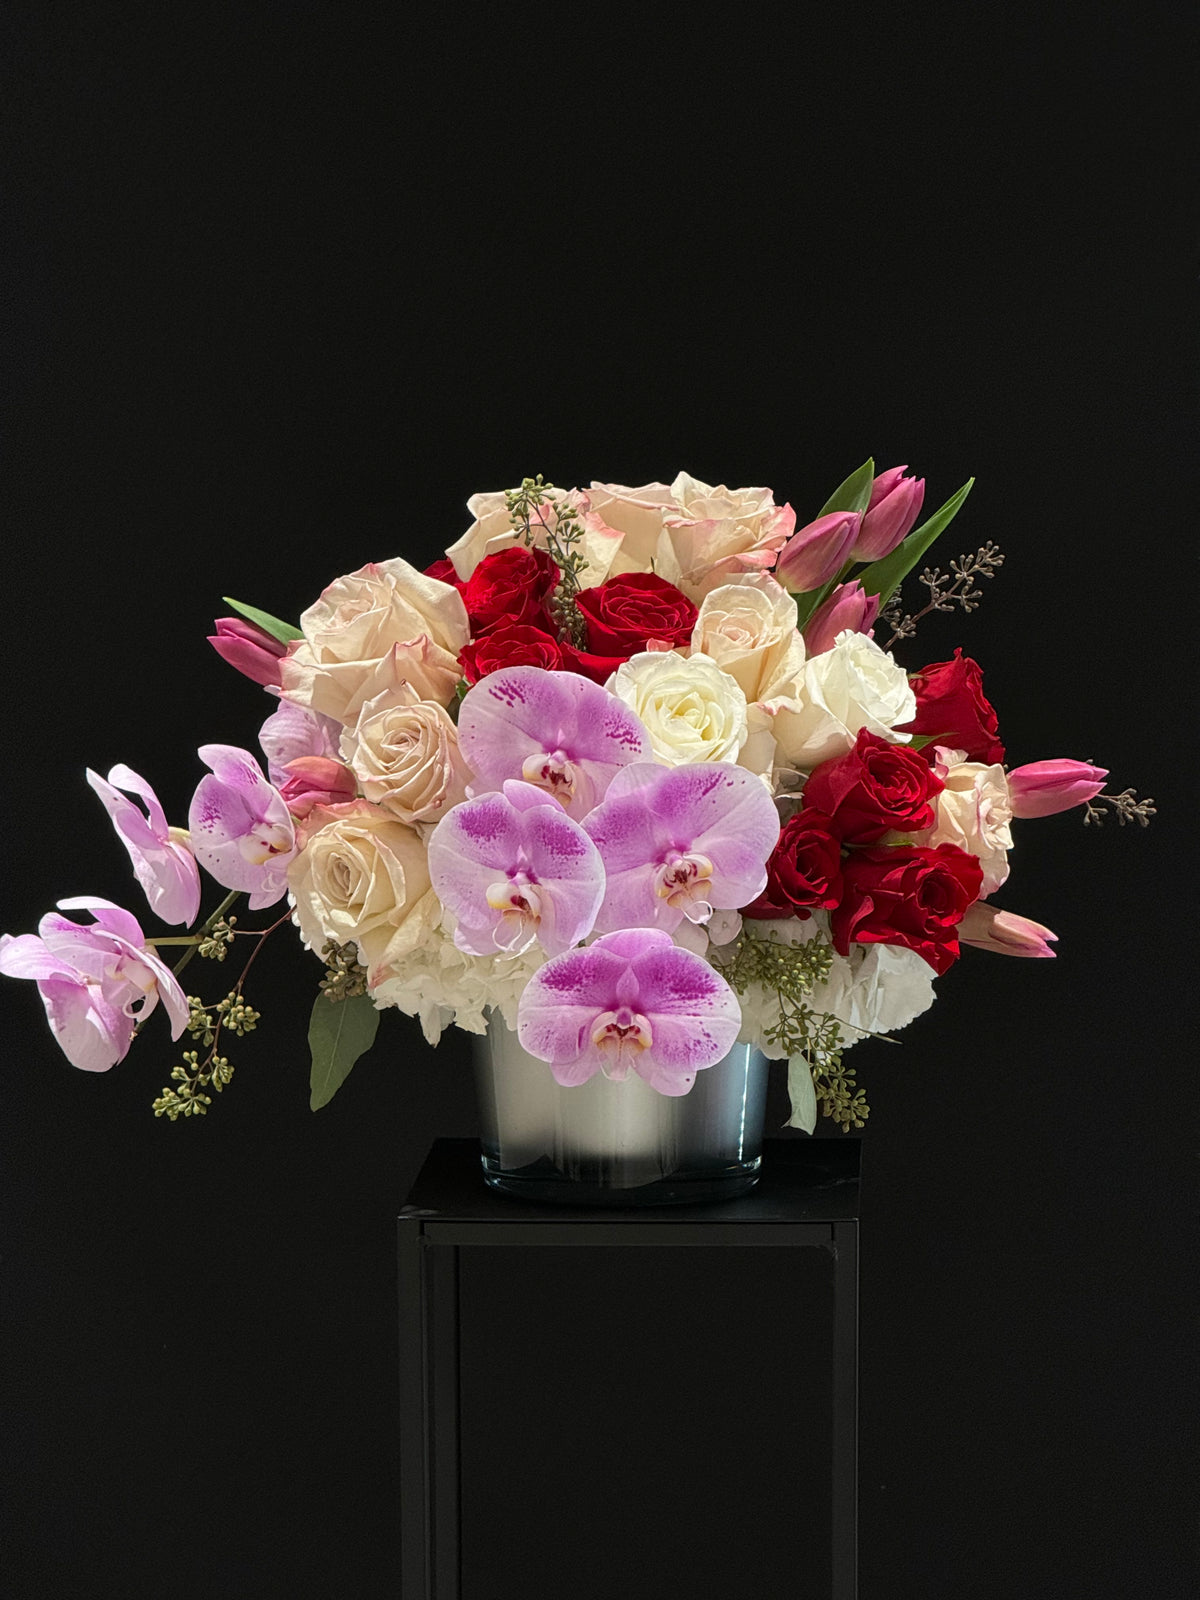 "Love Bloom Arrangement: Red, pink, and white roses, tulips, hydrangeas, and purple orchids in a luxurious display. Perfect for special occasions. Order now for local/GTA delivery!"